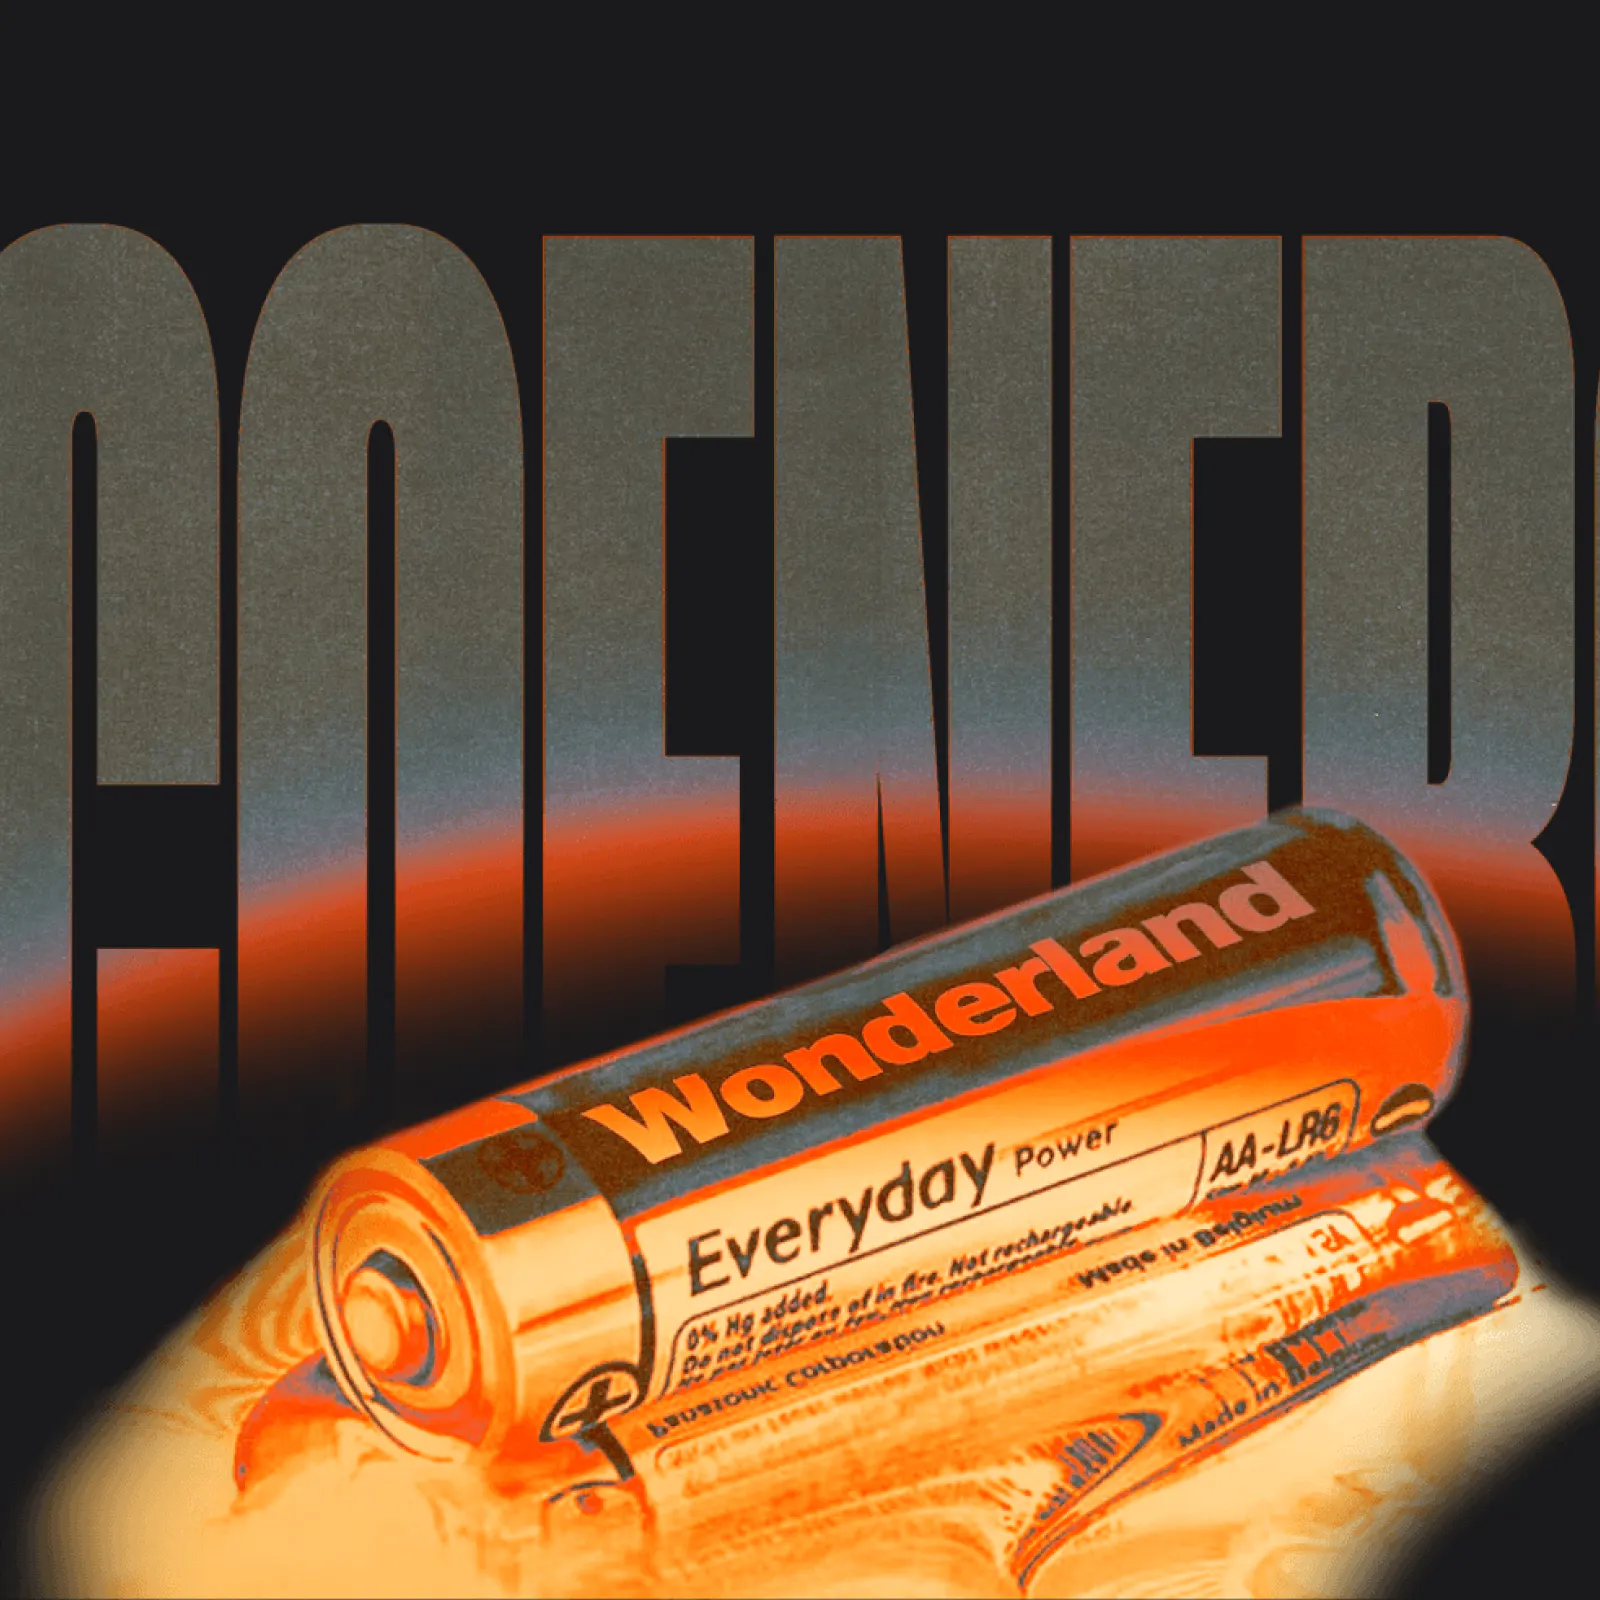 Graphic of tonal orange battery with text 'Wonderland' - Our predictions for 2022